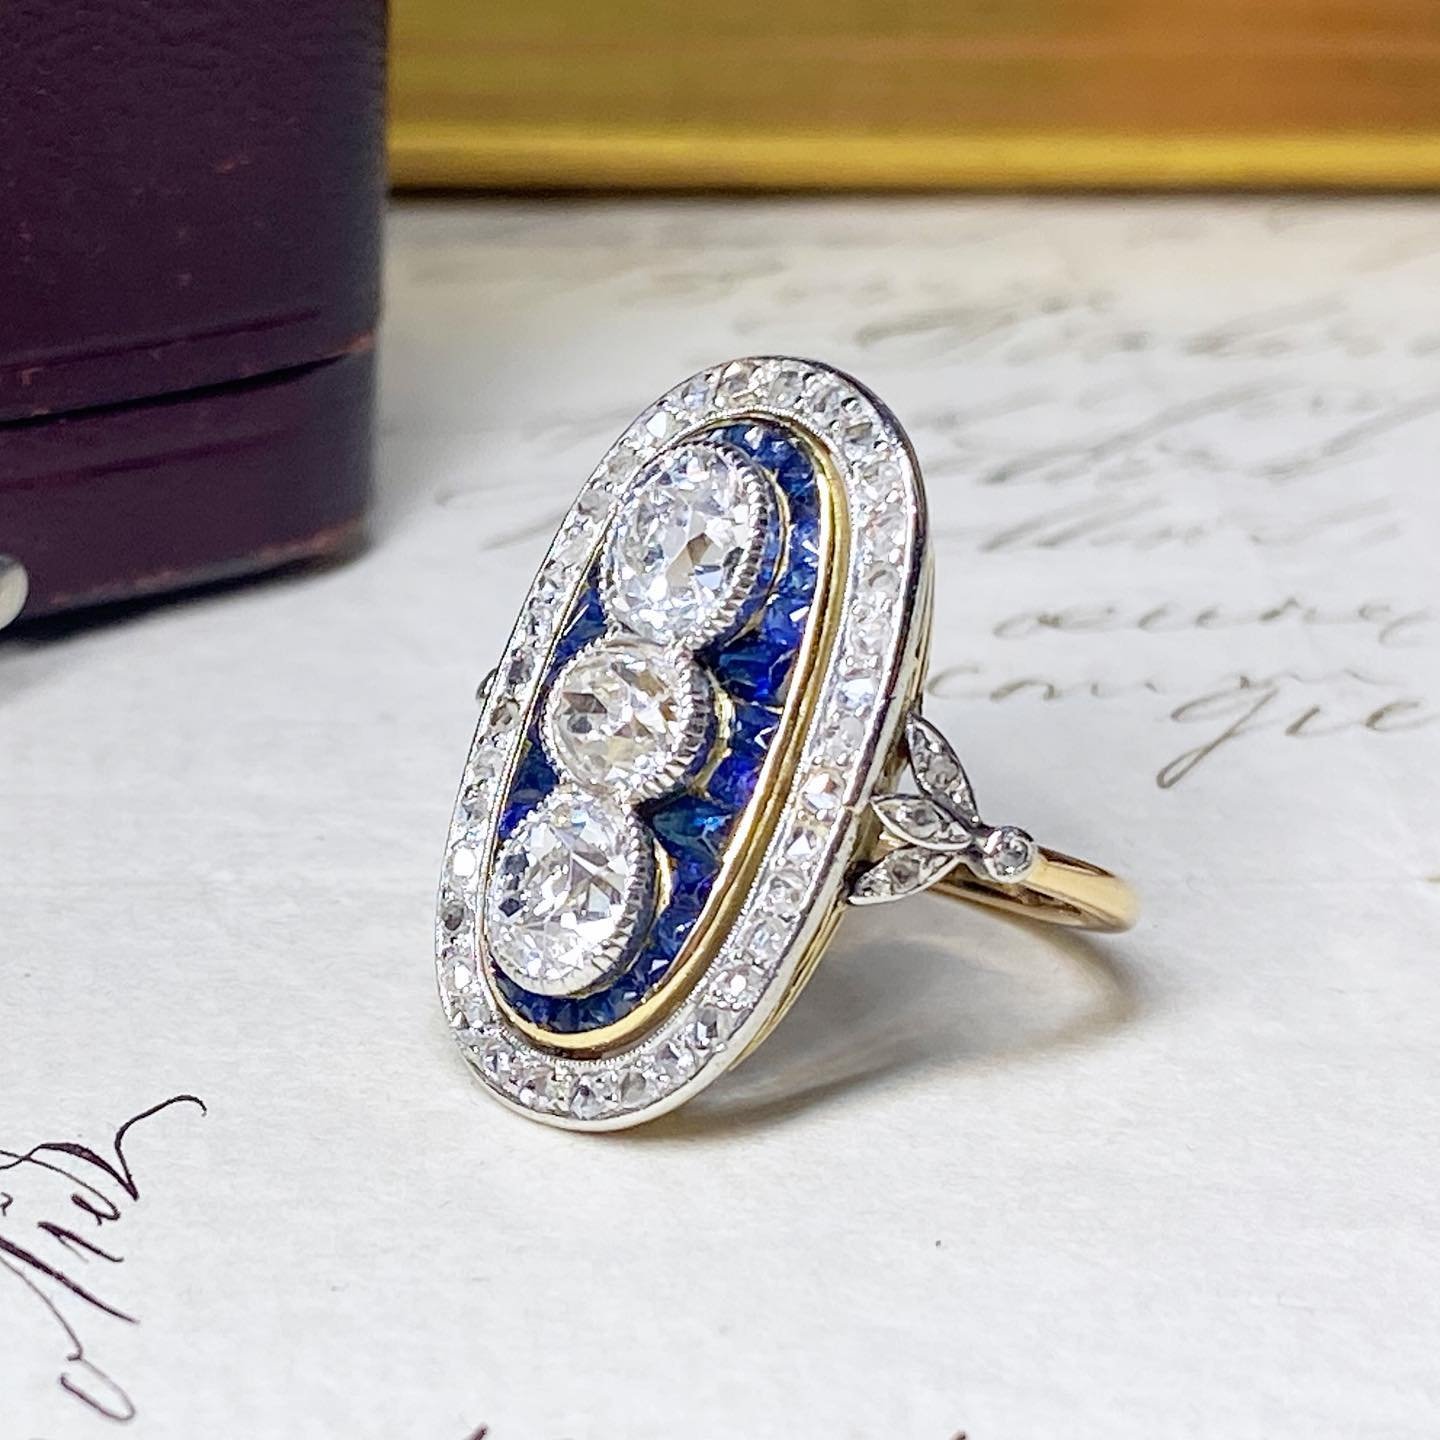 Belle Epoque ring in yellow gold and platinum set with three old mine cut diamonds (+/- 0.75 ct / 0.50 ct / 0.75ct), natural calibrated sapphires and small rose cut diamonds. Elegant design and fine setting job 😍

#antiquering#diamondring#victorianr